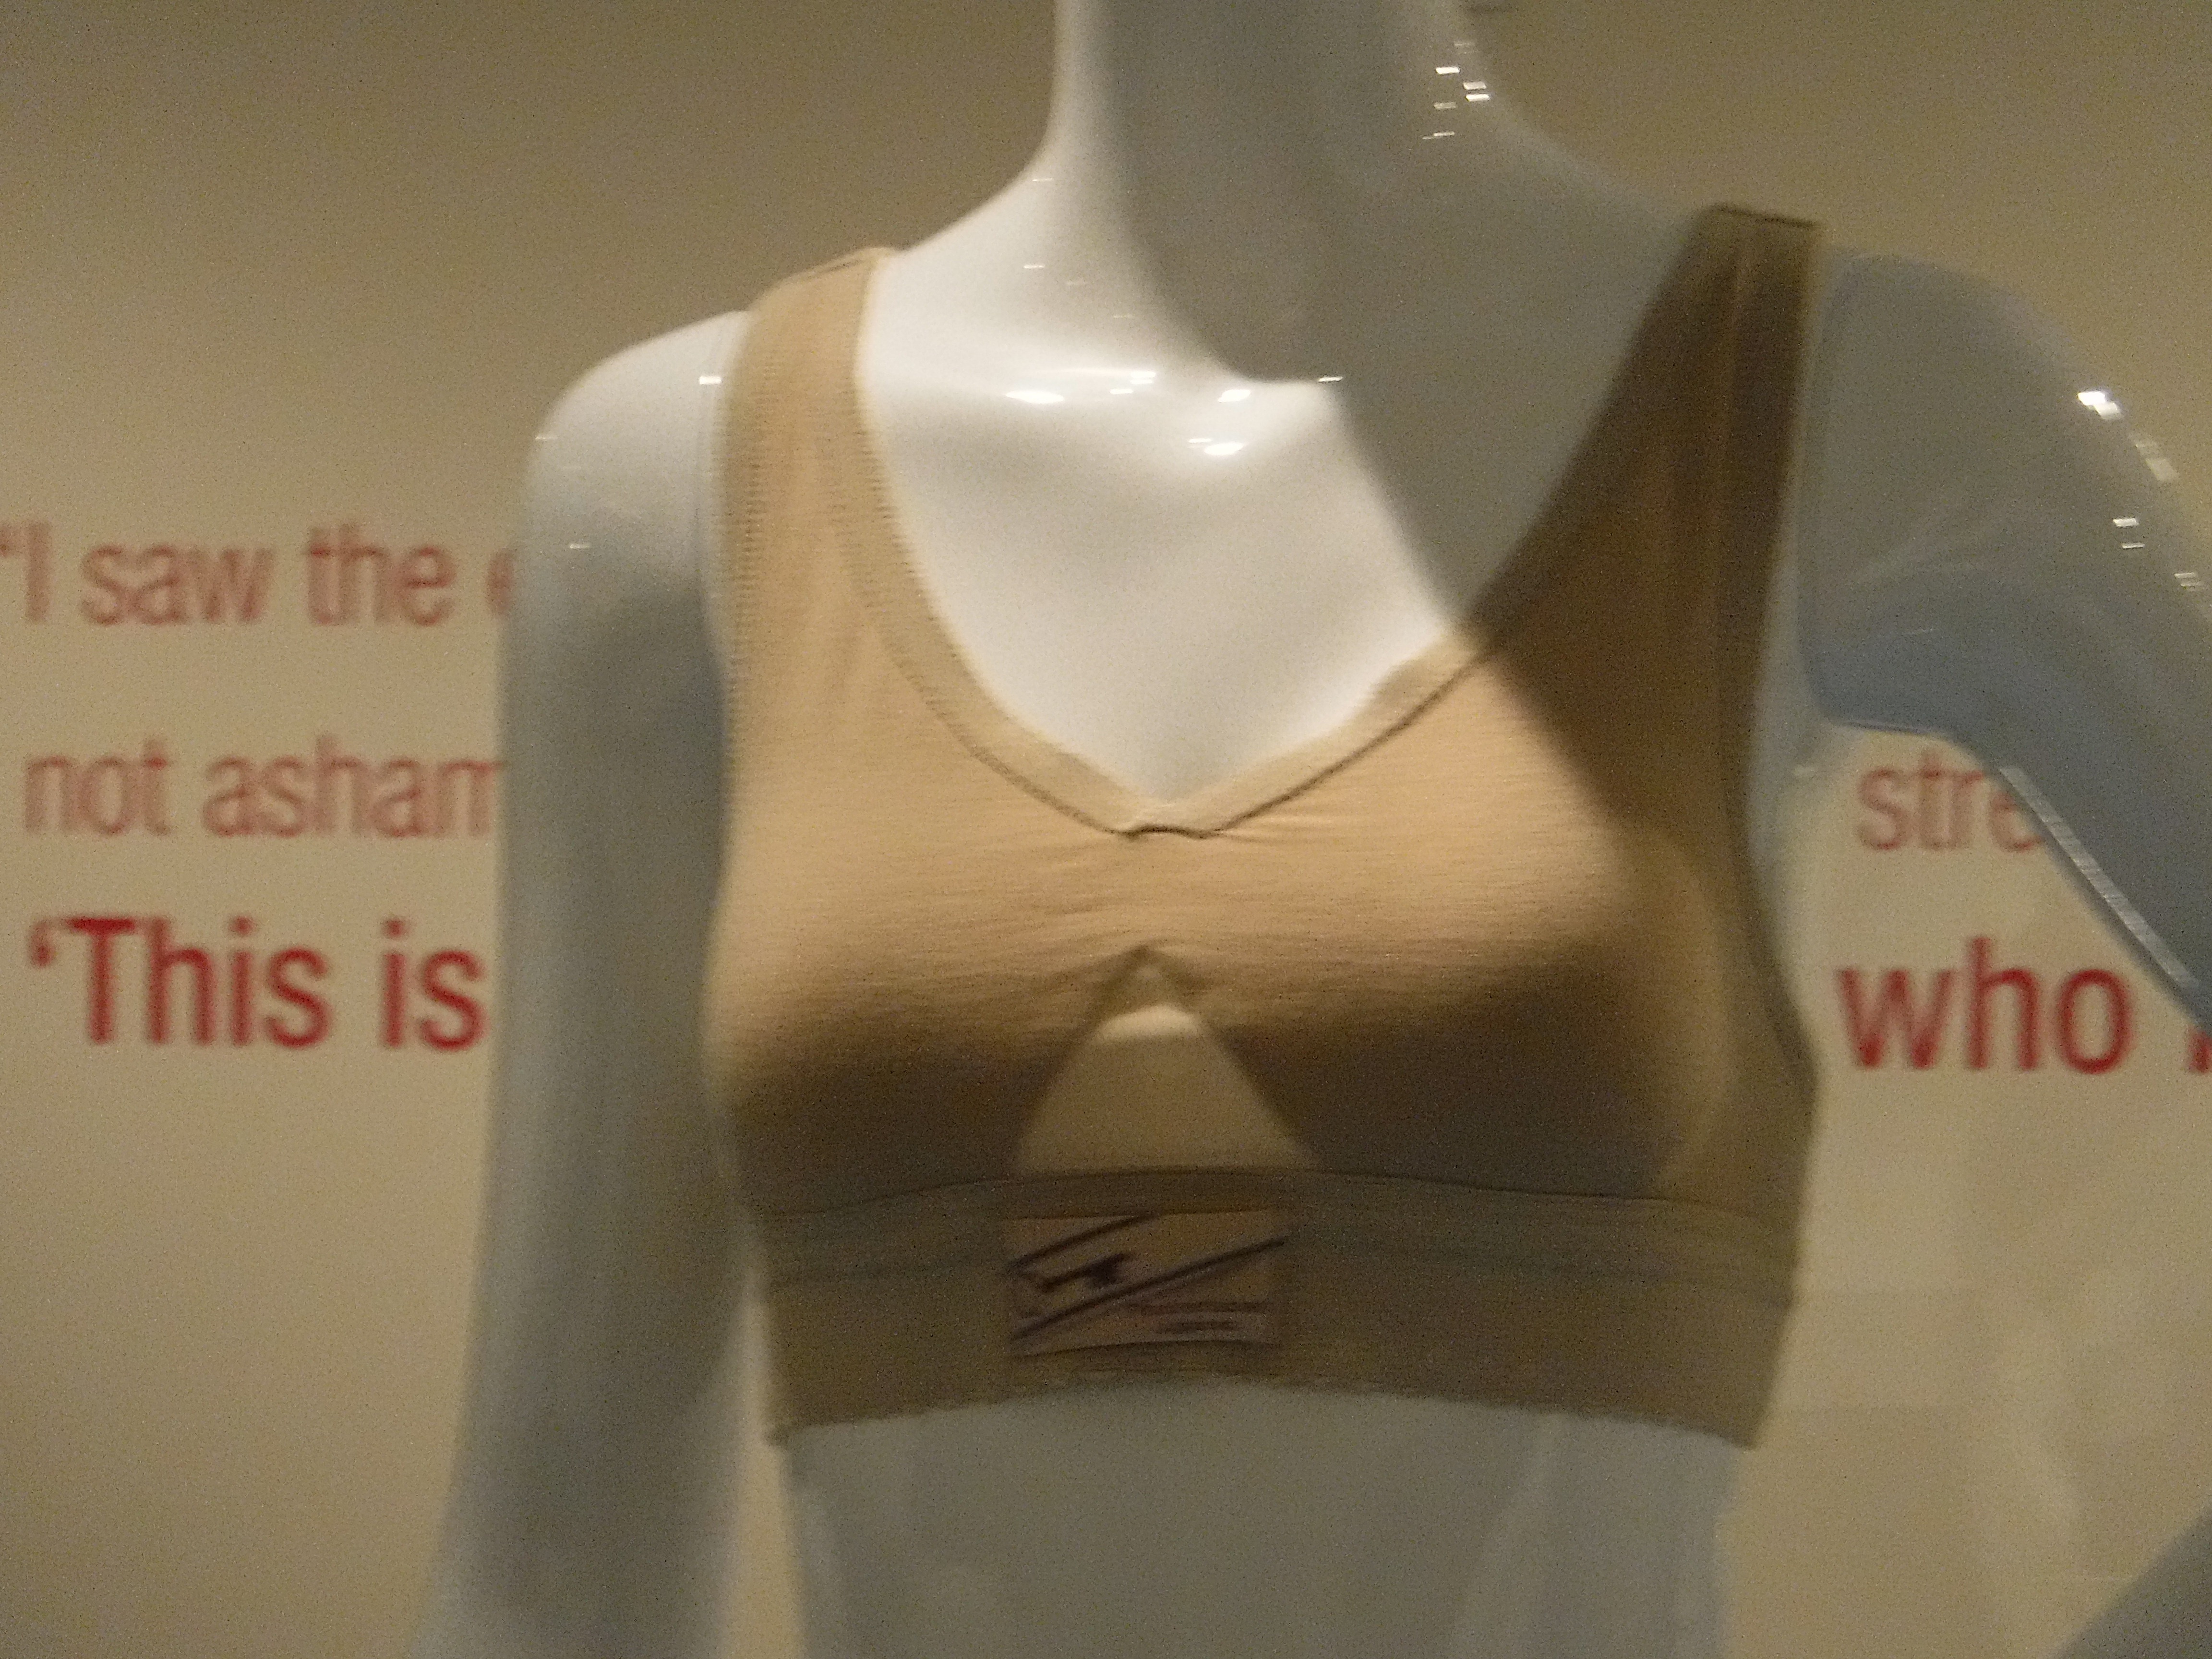 Loughborough scientists invent sports bra that stops boobs